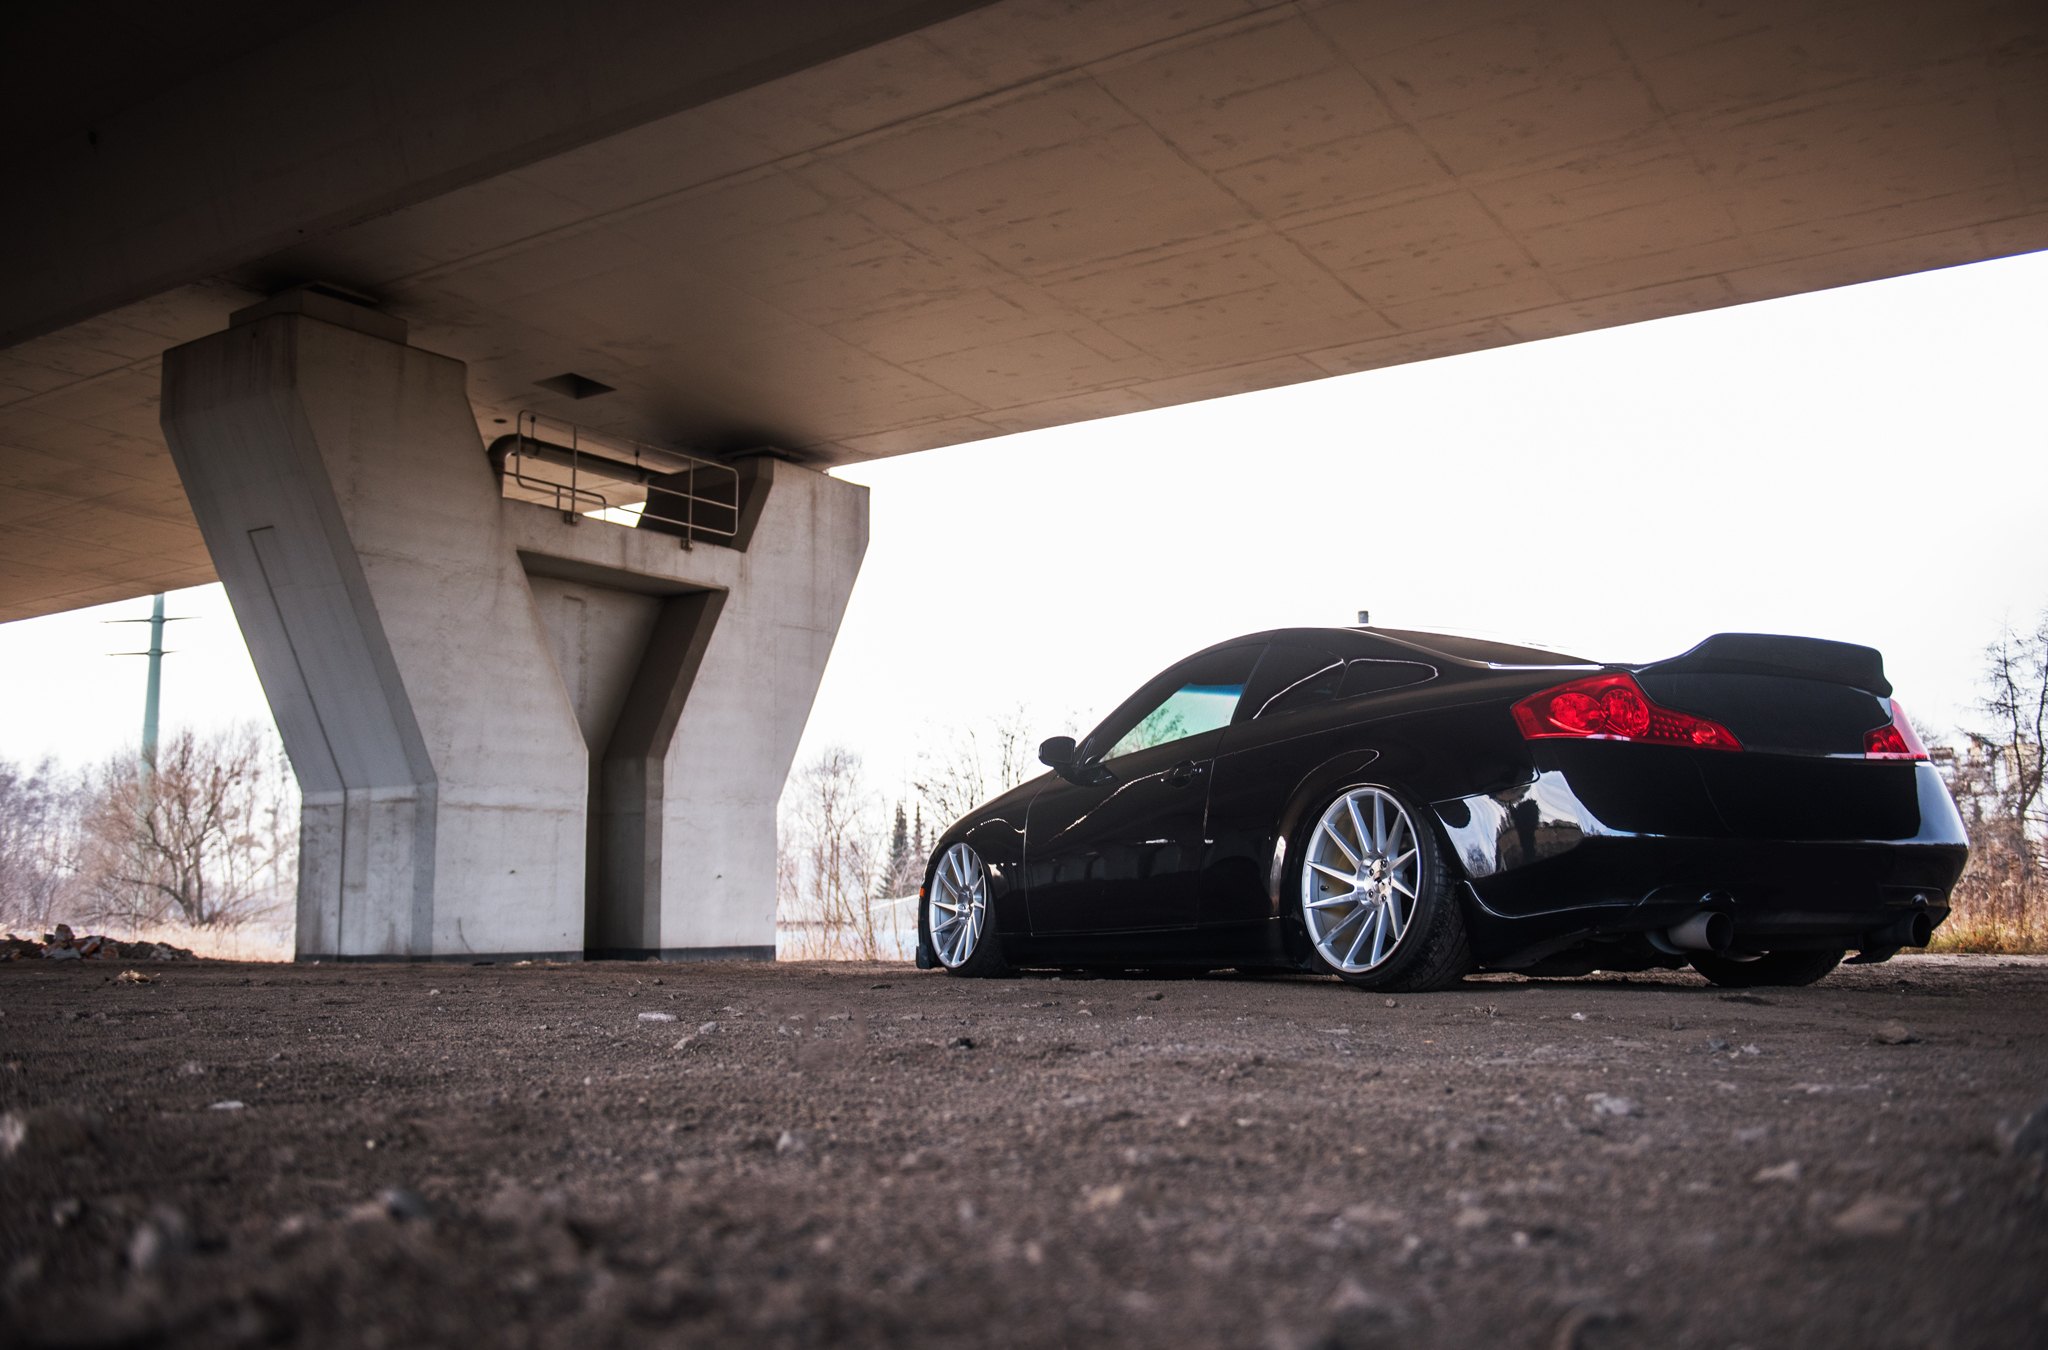 Black Stanced Infiniti G35 with Aftermarket Rear Spoiler - Photo by JR Wheels